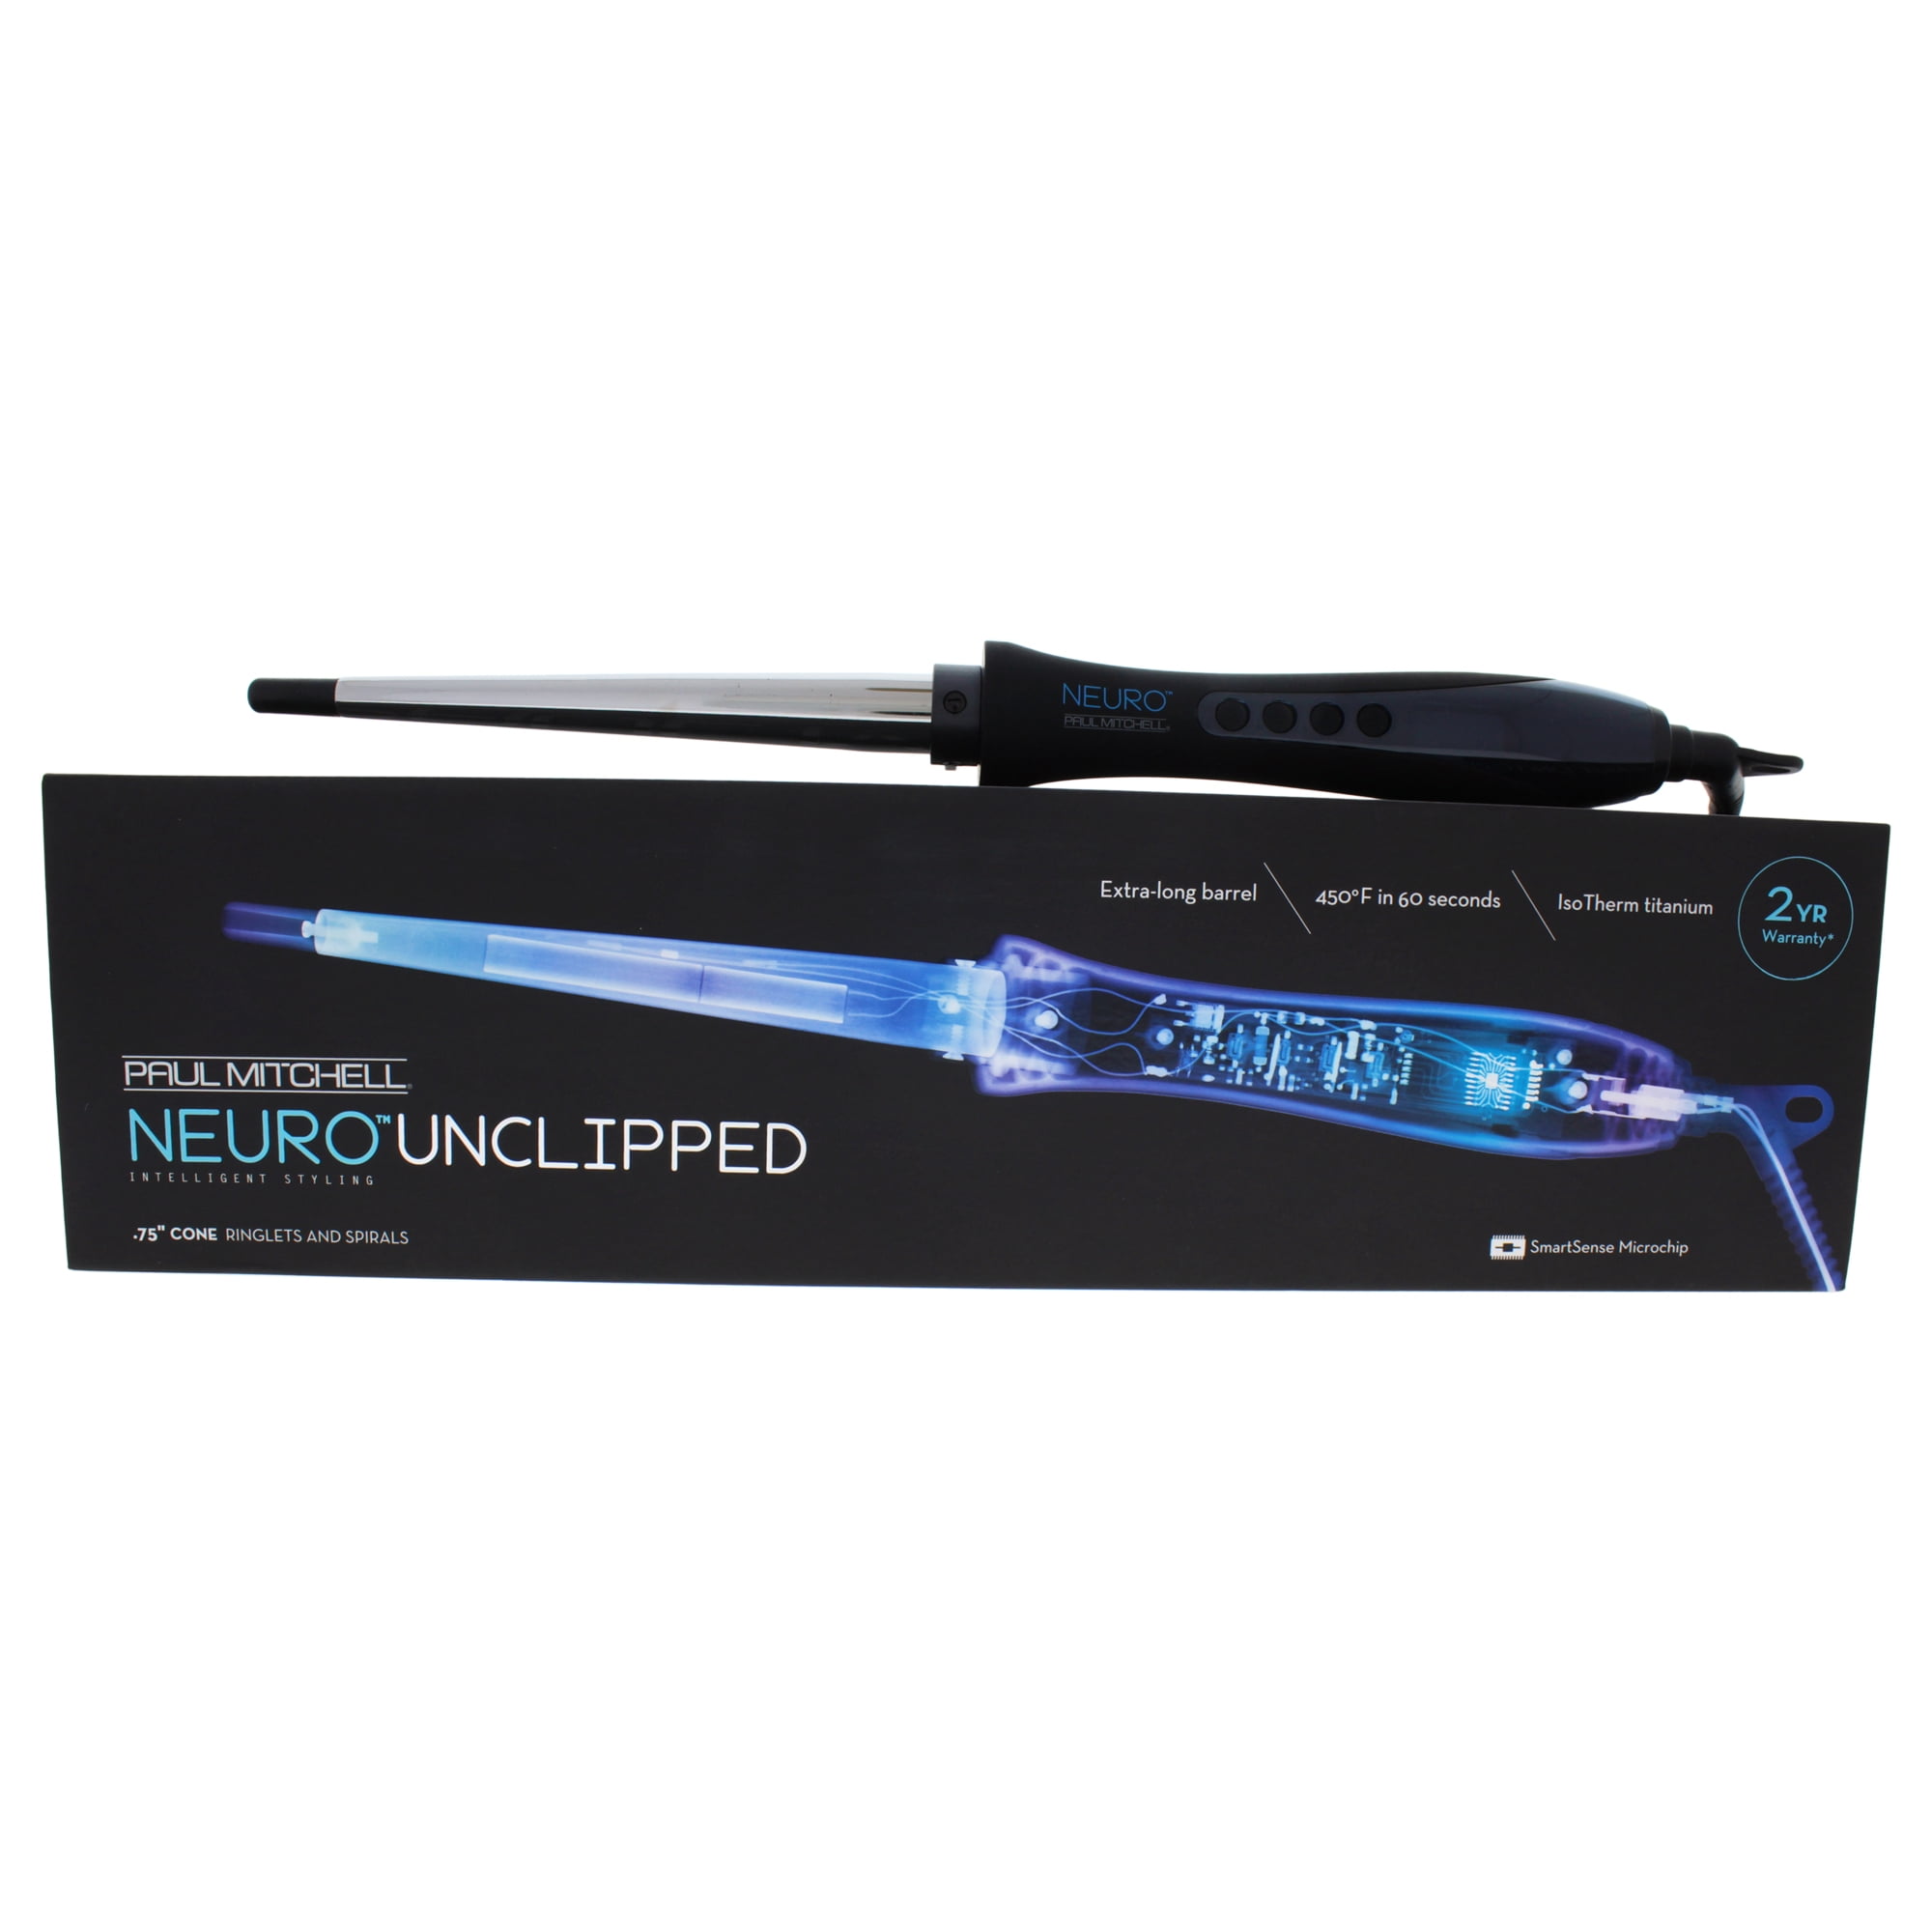 Paul Mitchell Neuro Unclipped Curling Iron - Model # NSSCNA - Black/Silver  - 0.75 Inch Curling Iron - Walmart.com